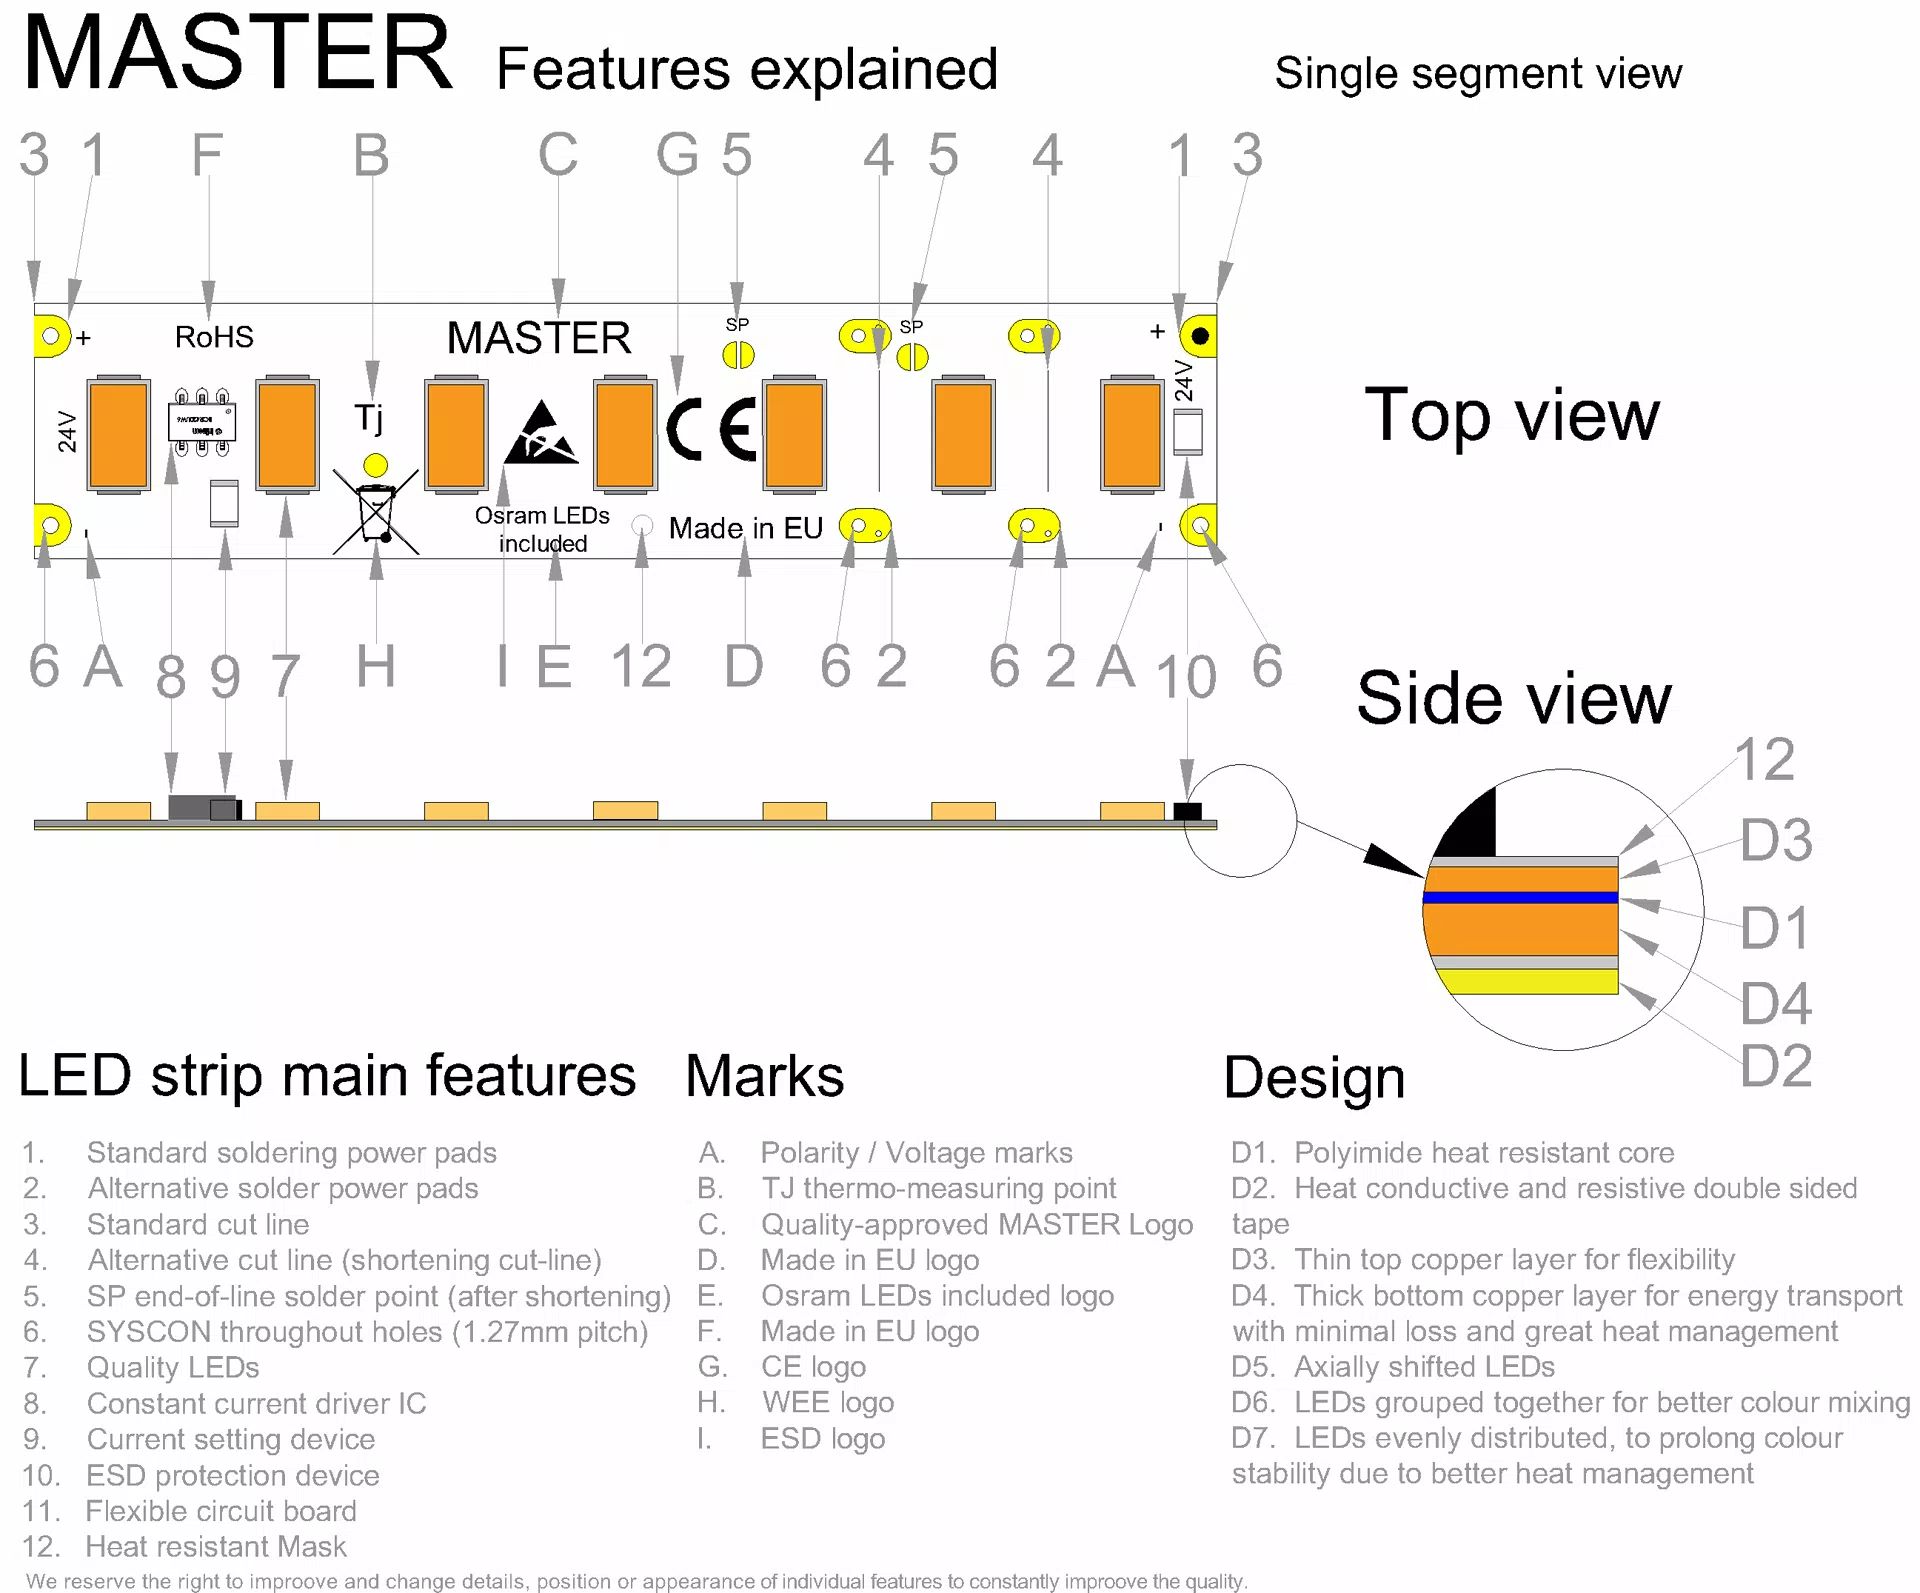 MASTER SUPERPOWER LED strip segment drawing with all features explained